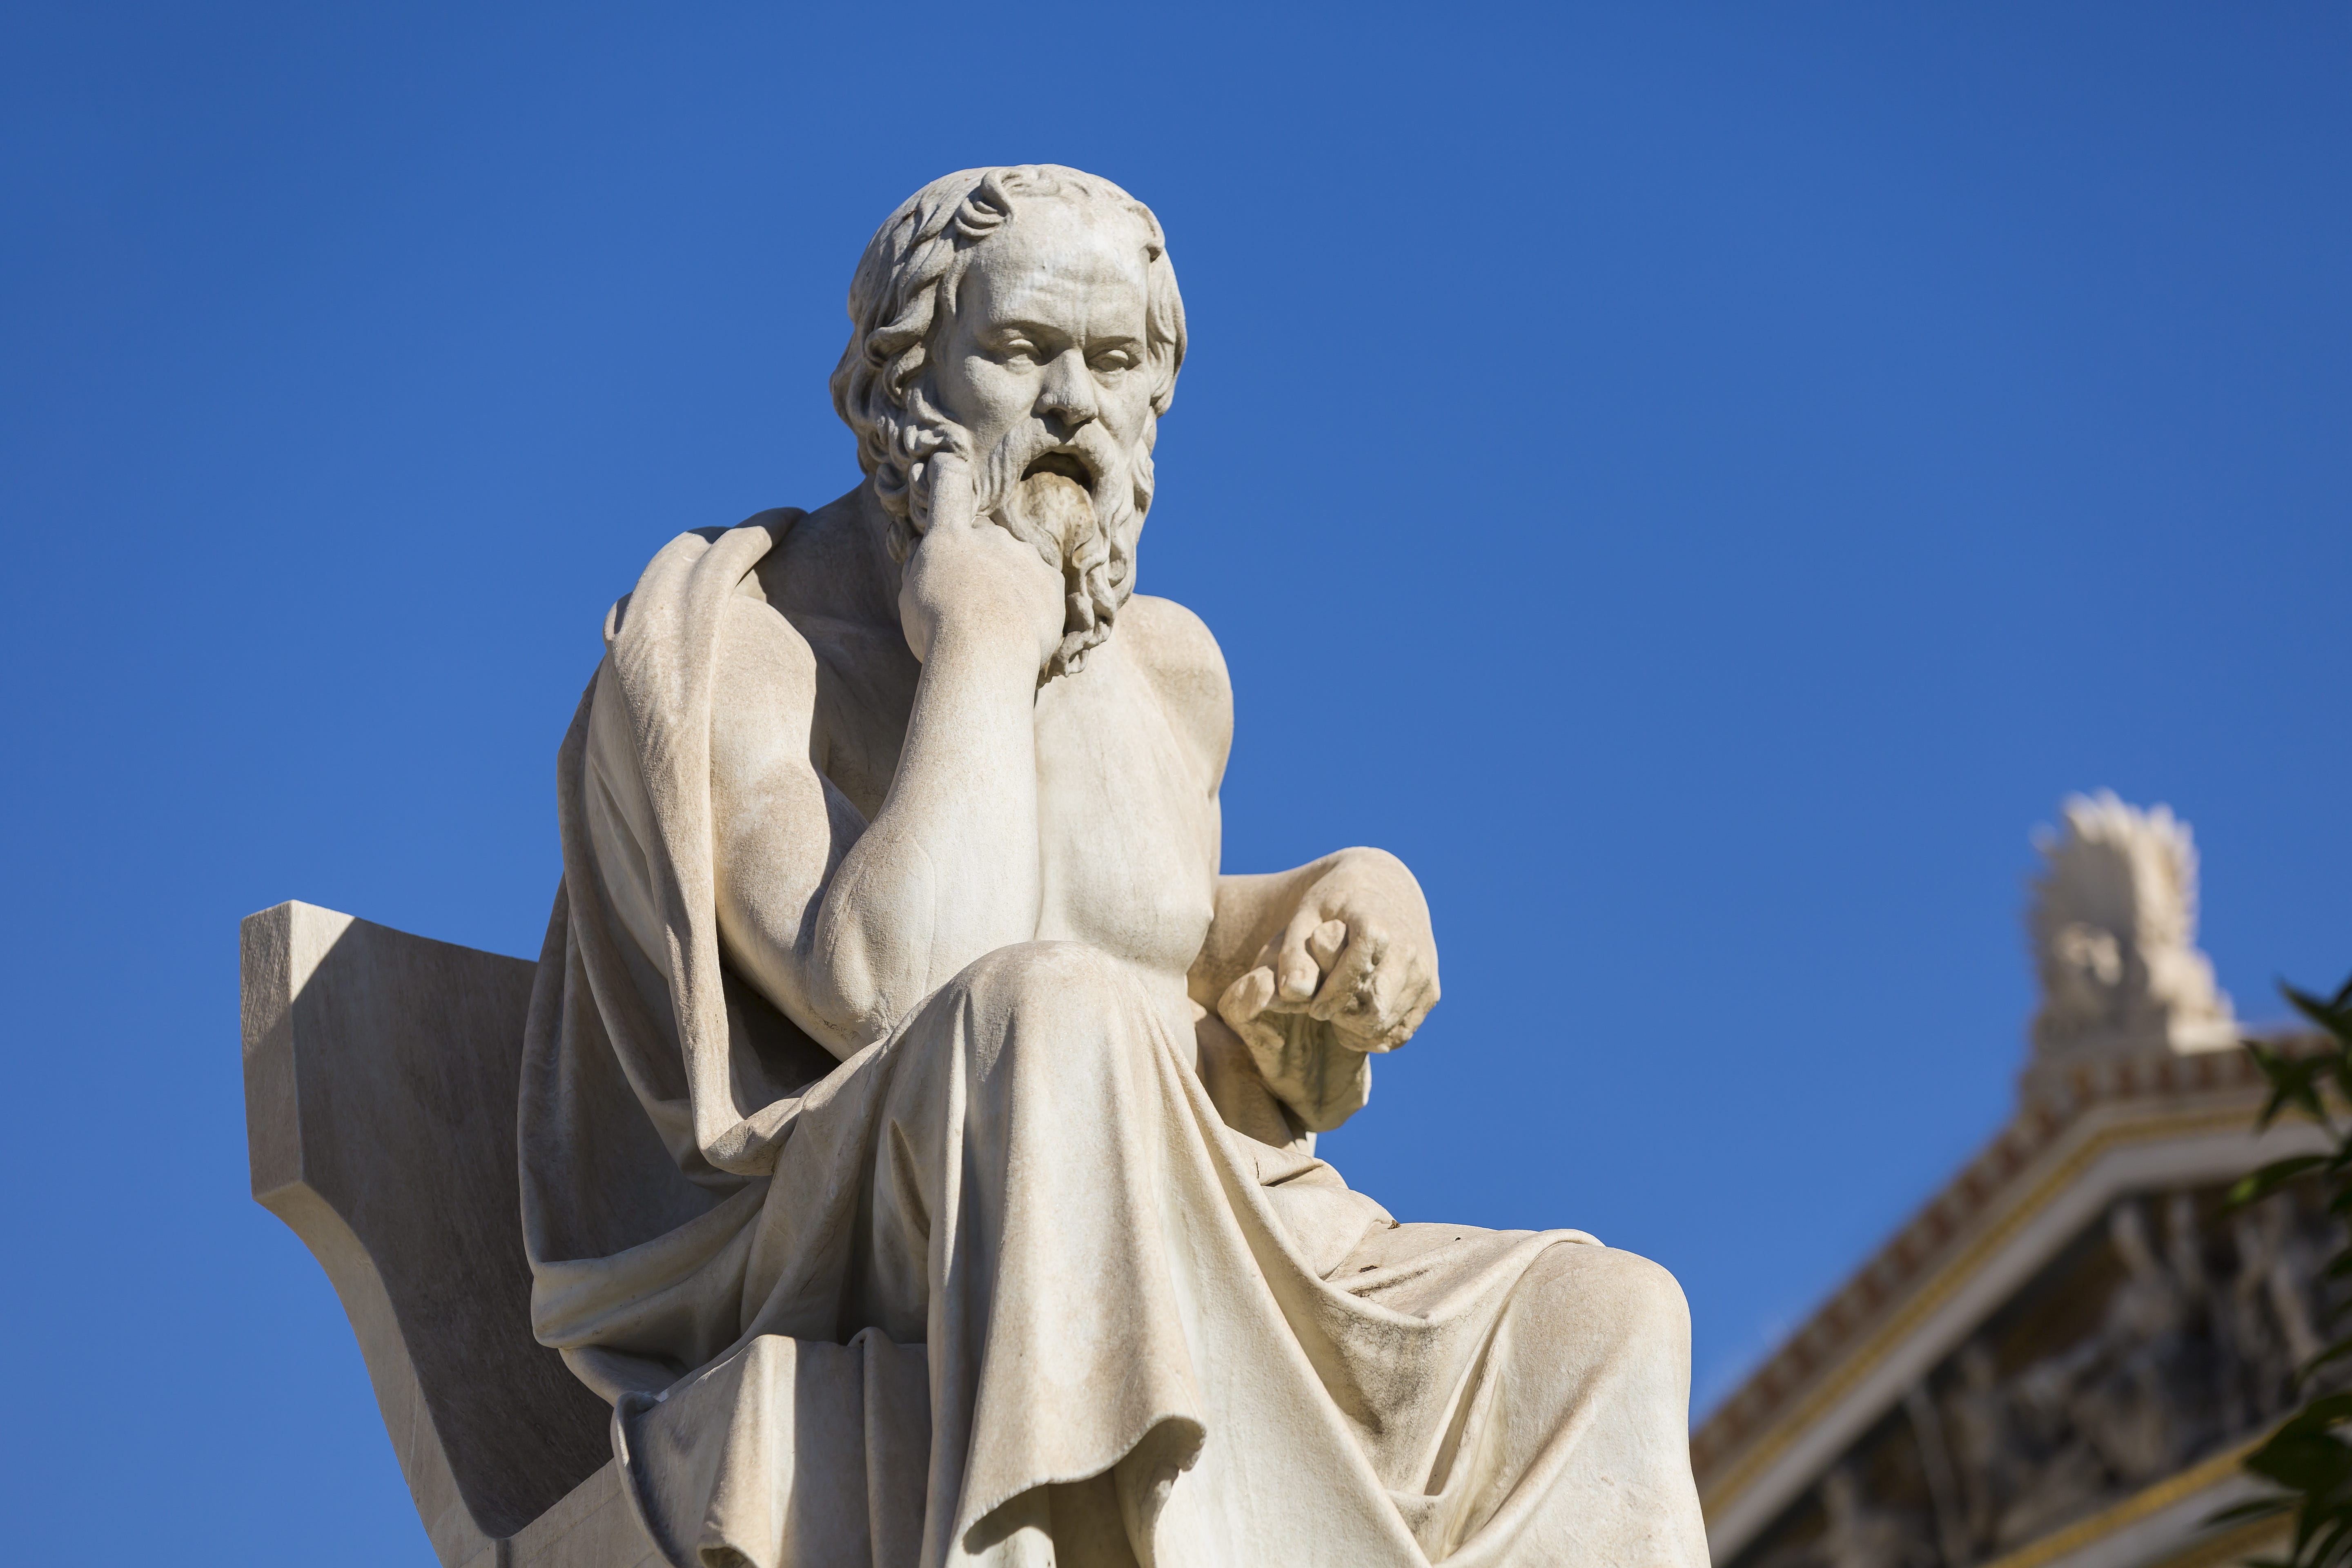 socrates contribution to education essay